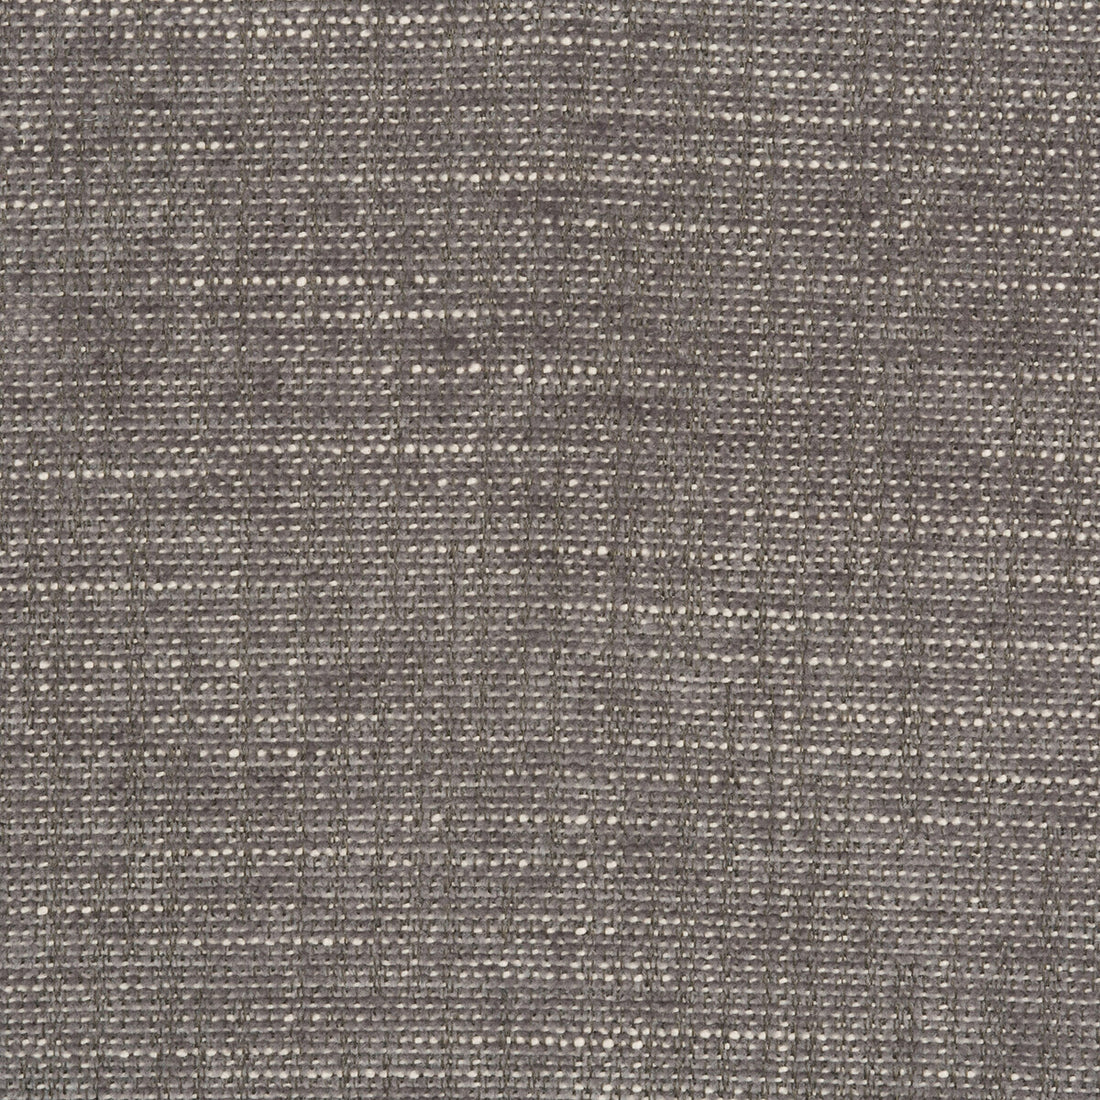 Beacon fabric in gunmetal color - pattern 34182.21.0 - by Kravet Contract in the Crypton Incase collection